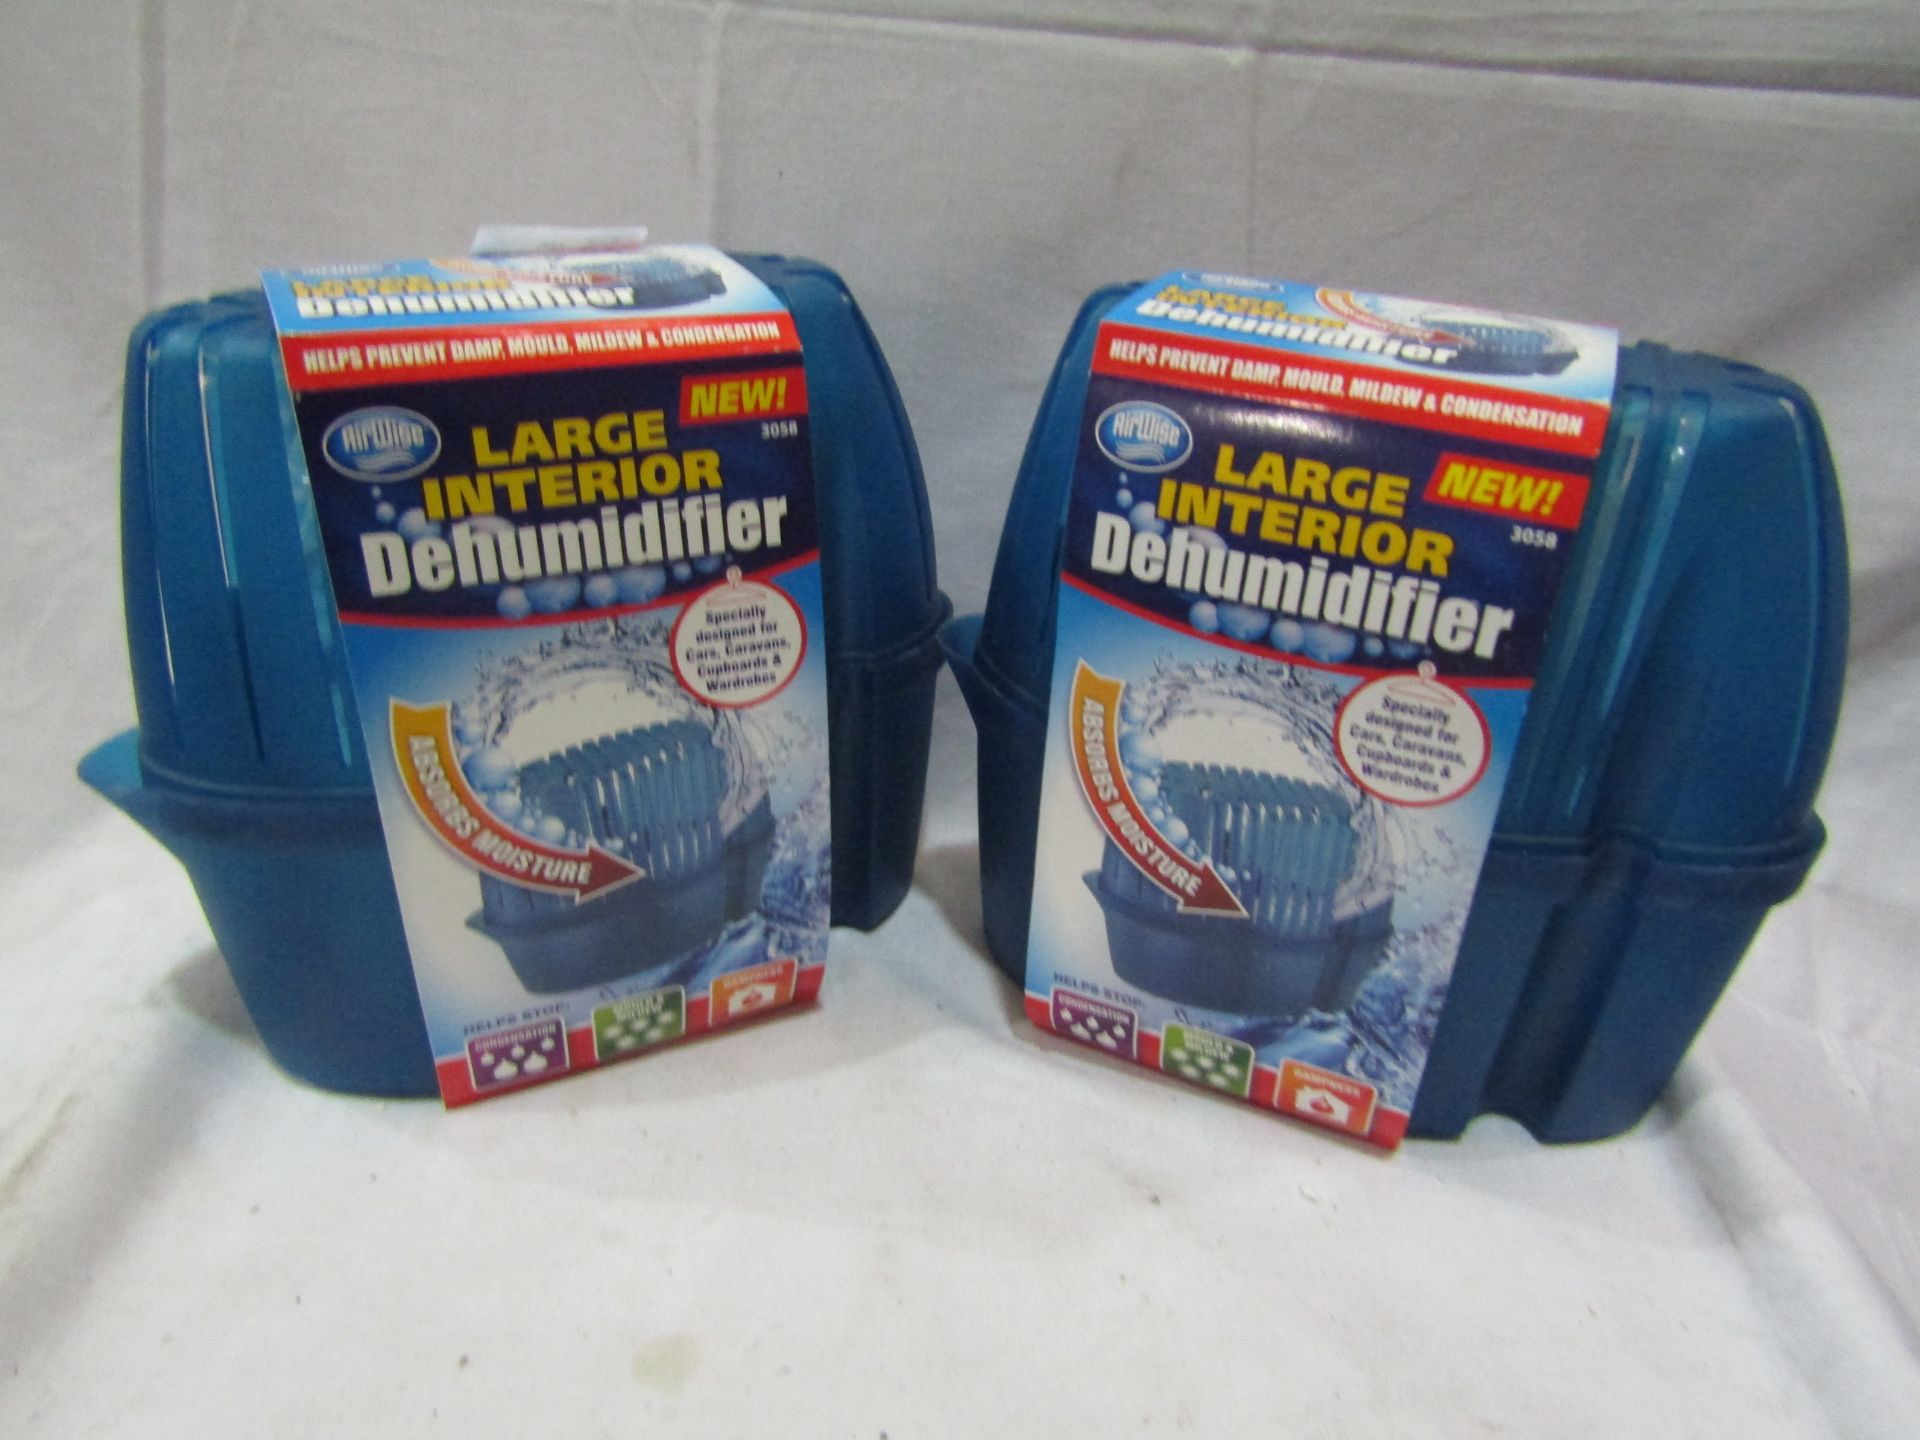 2 X Large Interior Dehumidifiers 450g Unchecked & Packaged